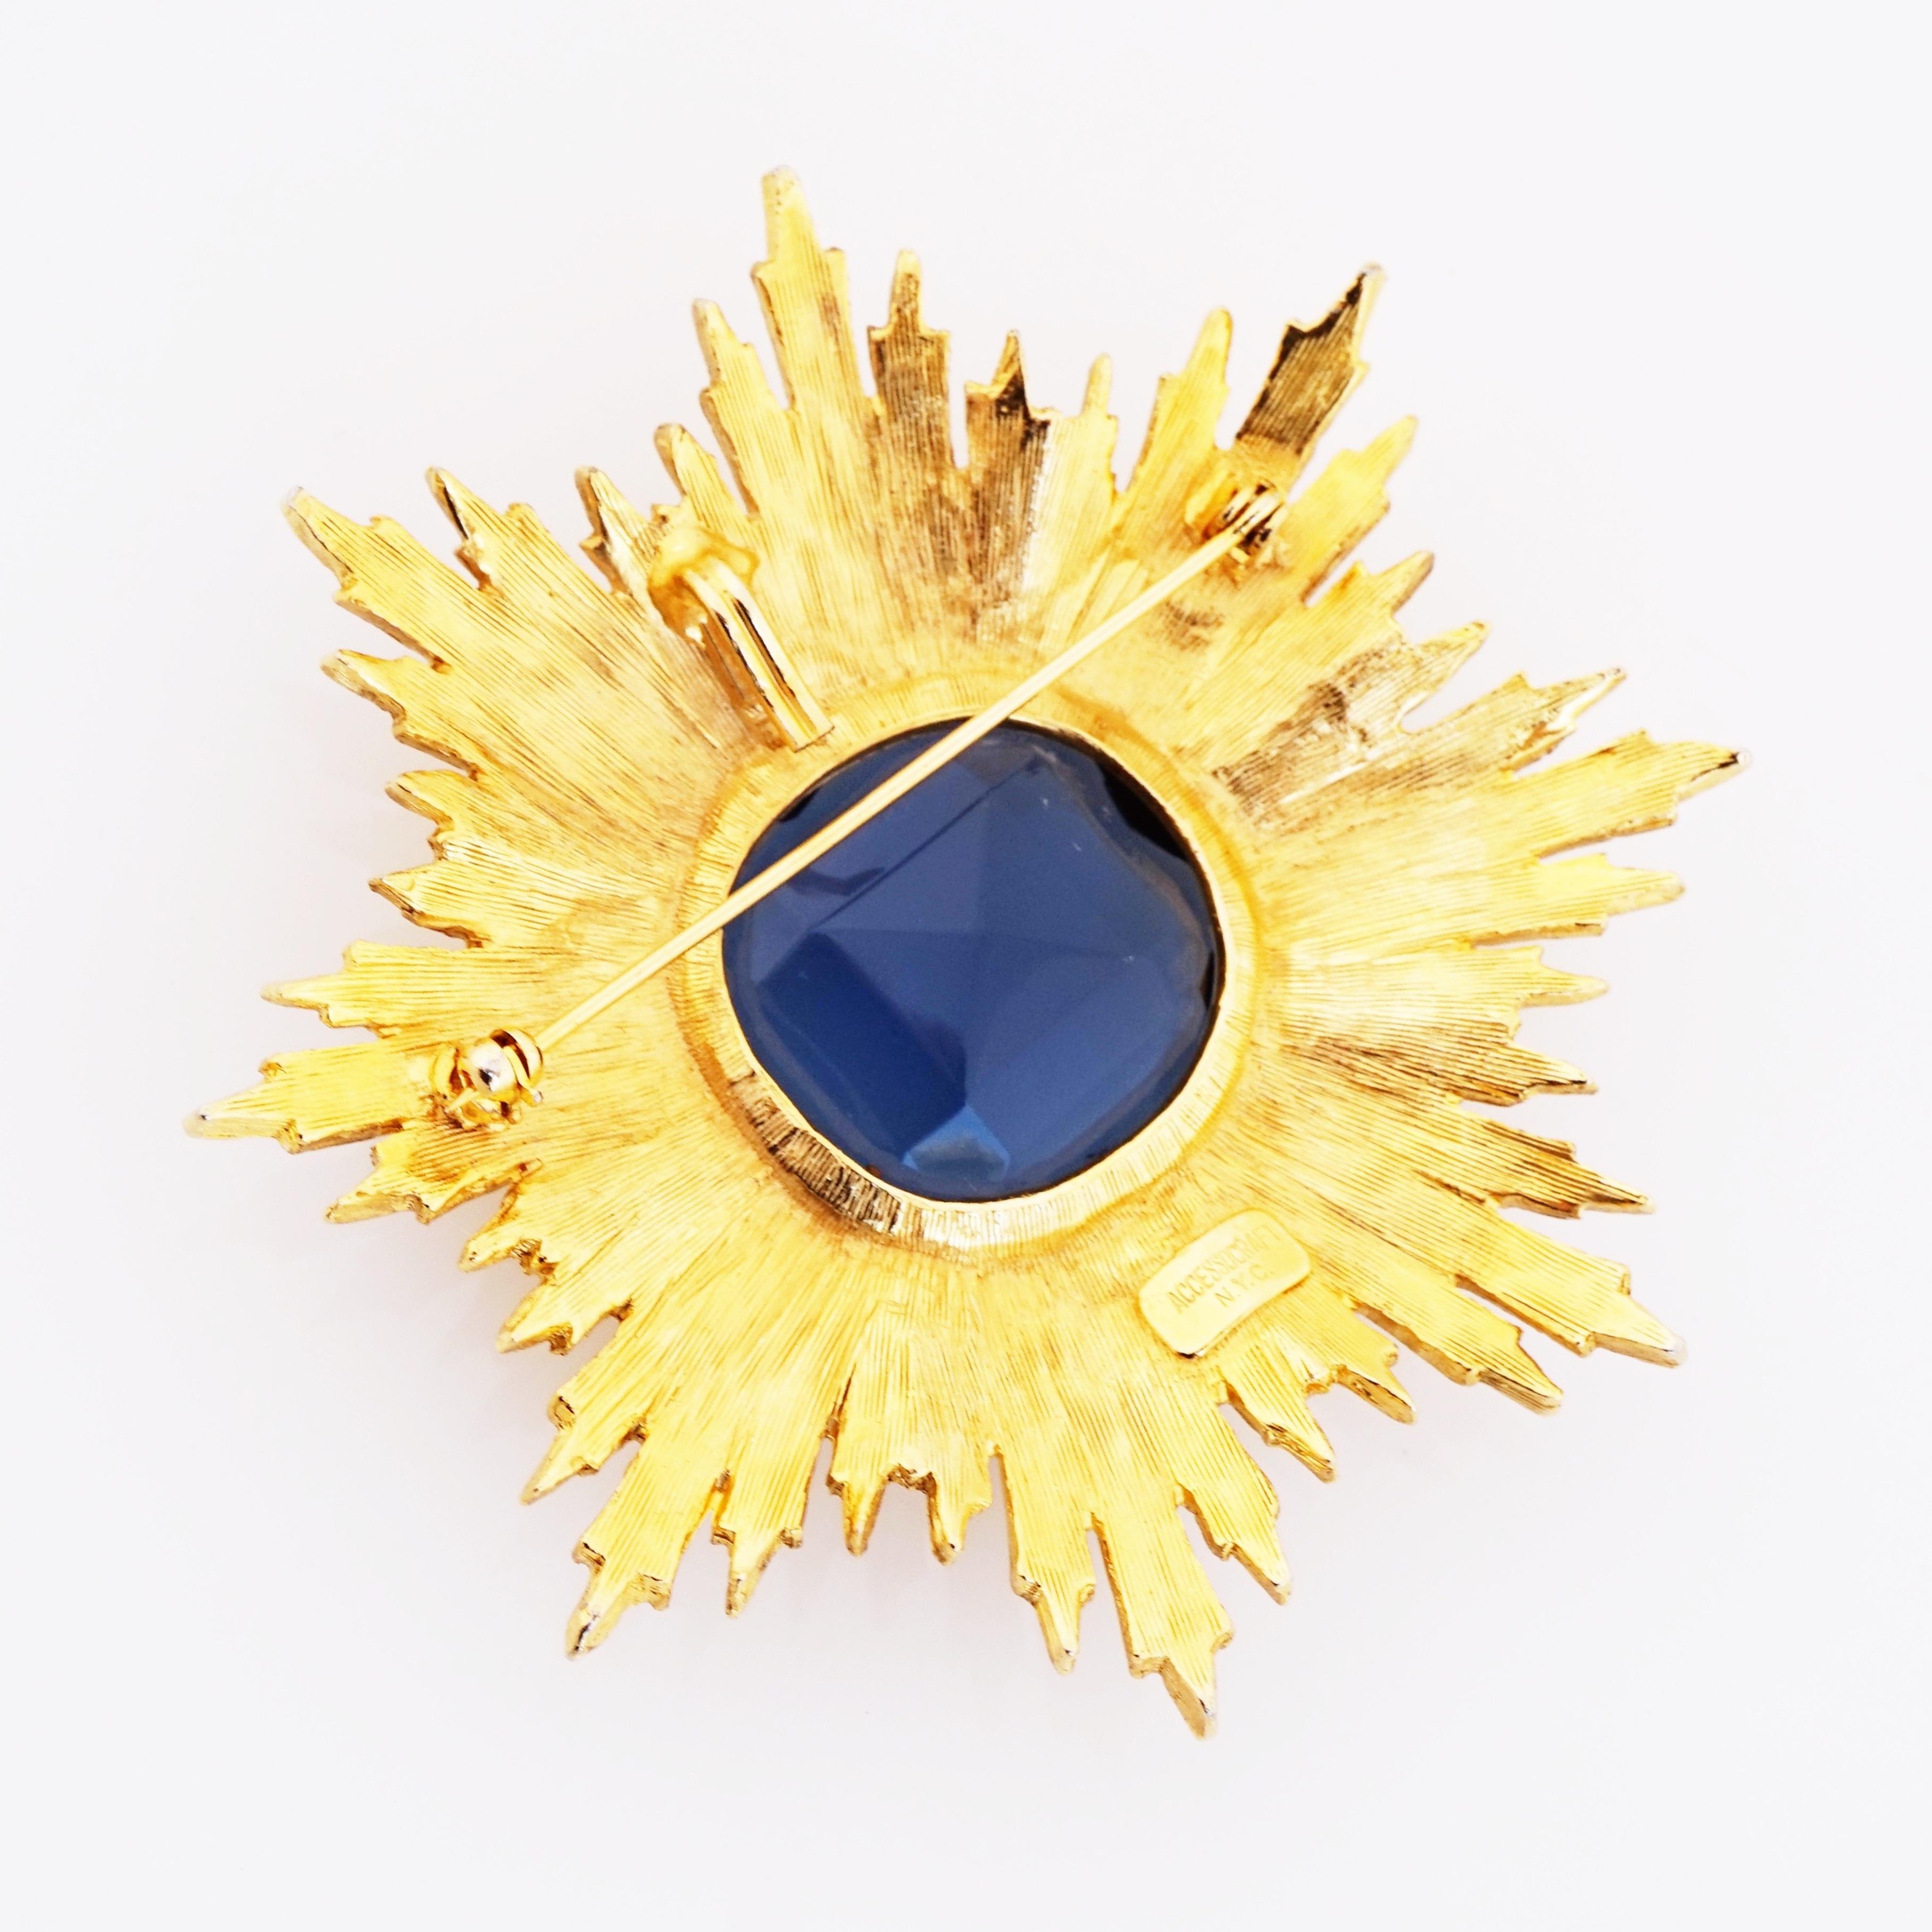 Modern Oversized Gold Sunburst Brooch With Blue Sapphire Crystal By Accessocraft, 1970s